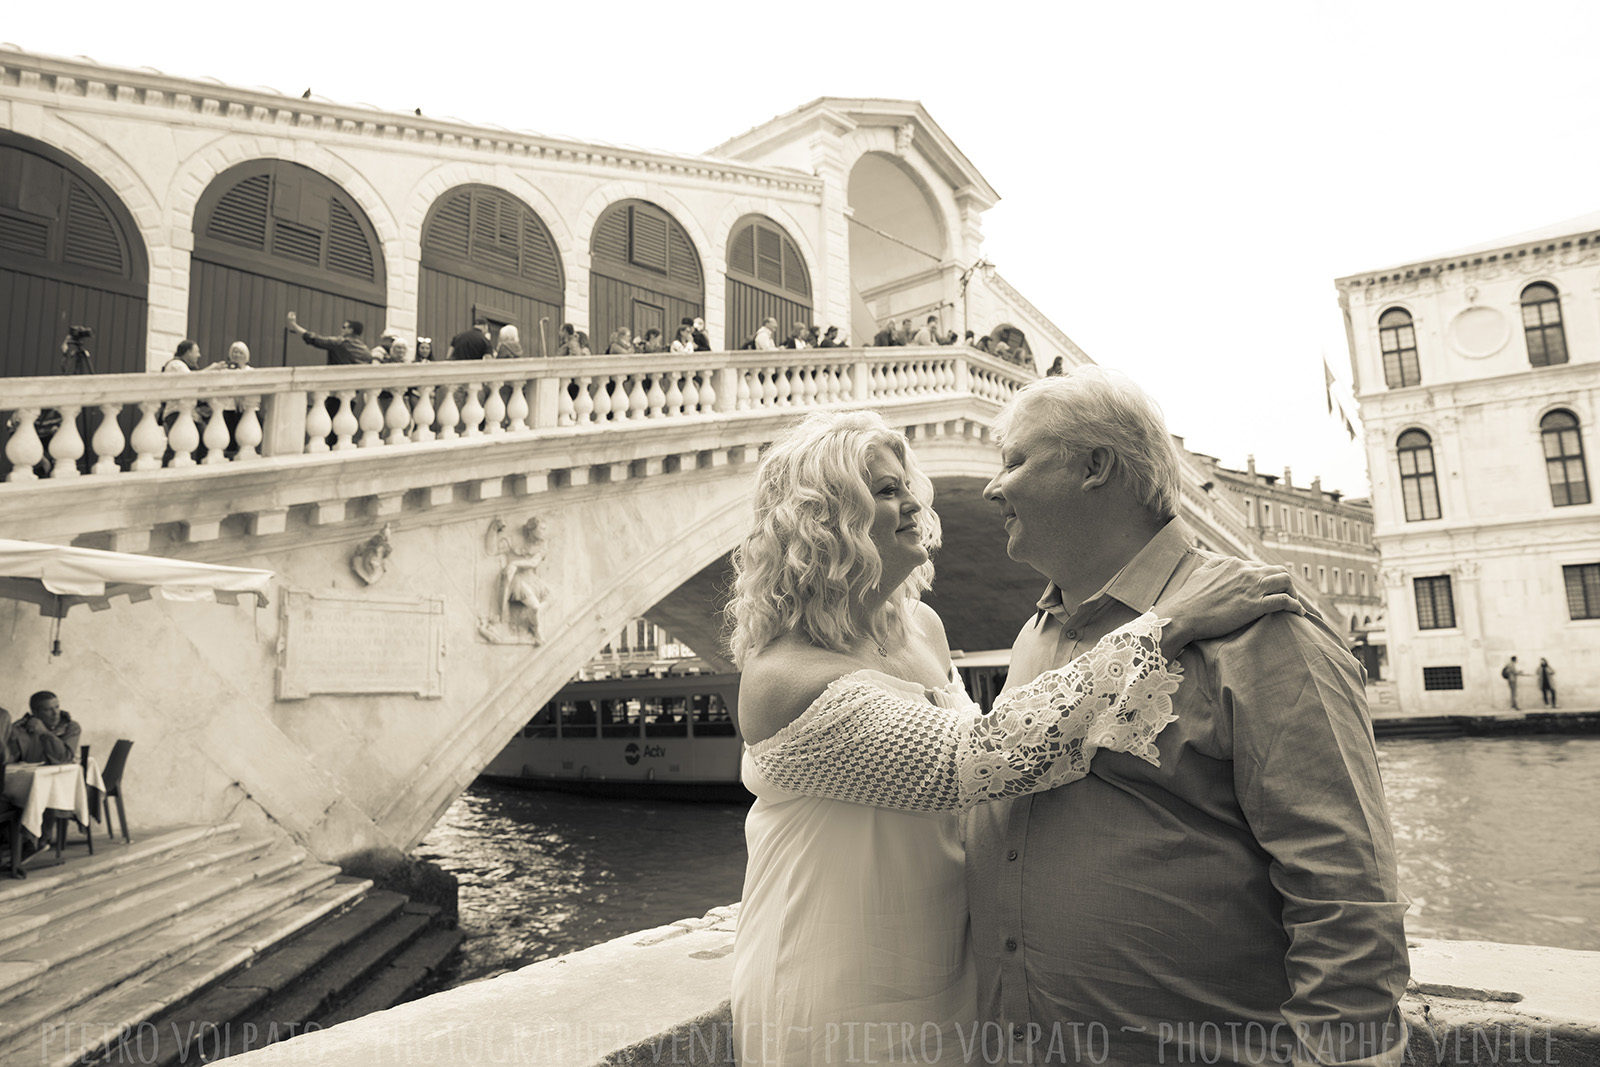 Photography session with photographer in Venice ~ Romantic and fun honeymoon photo shoot in Venice ~ Venice photo walk